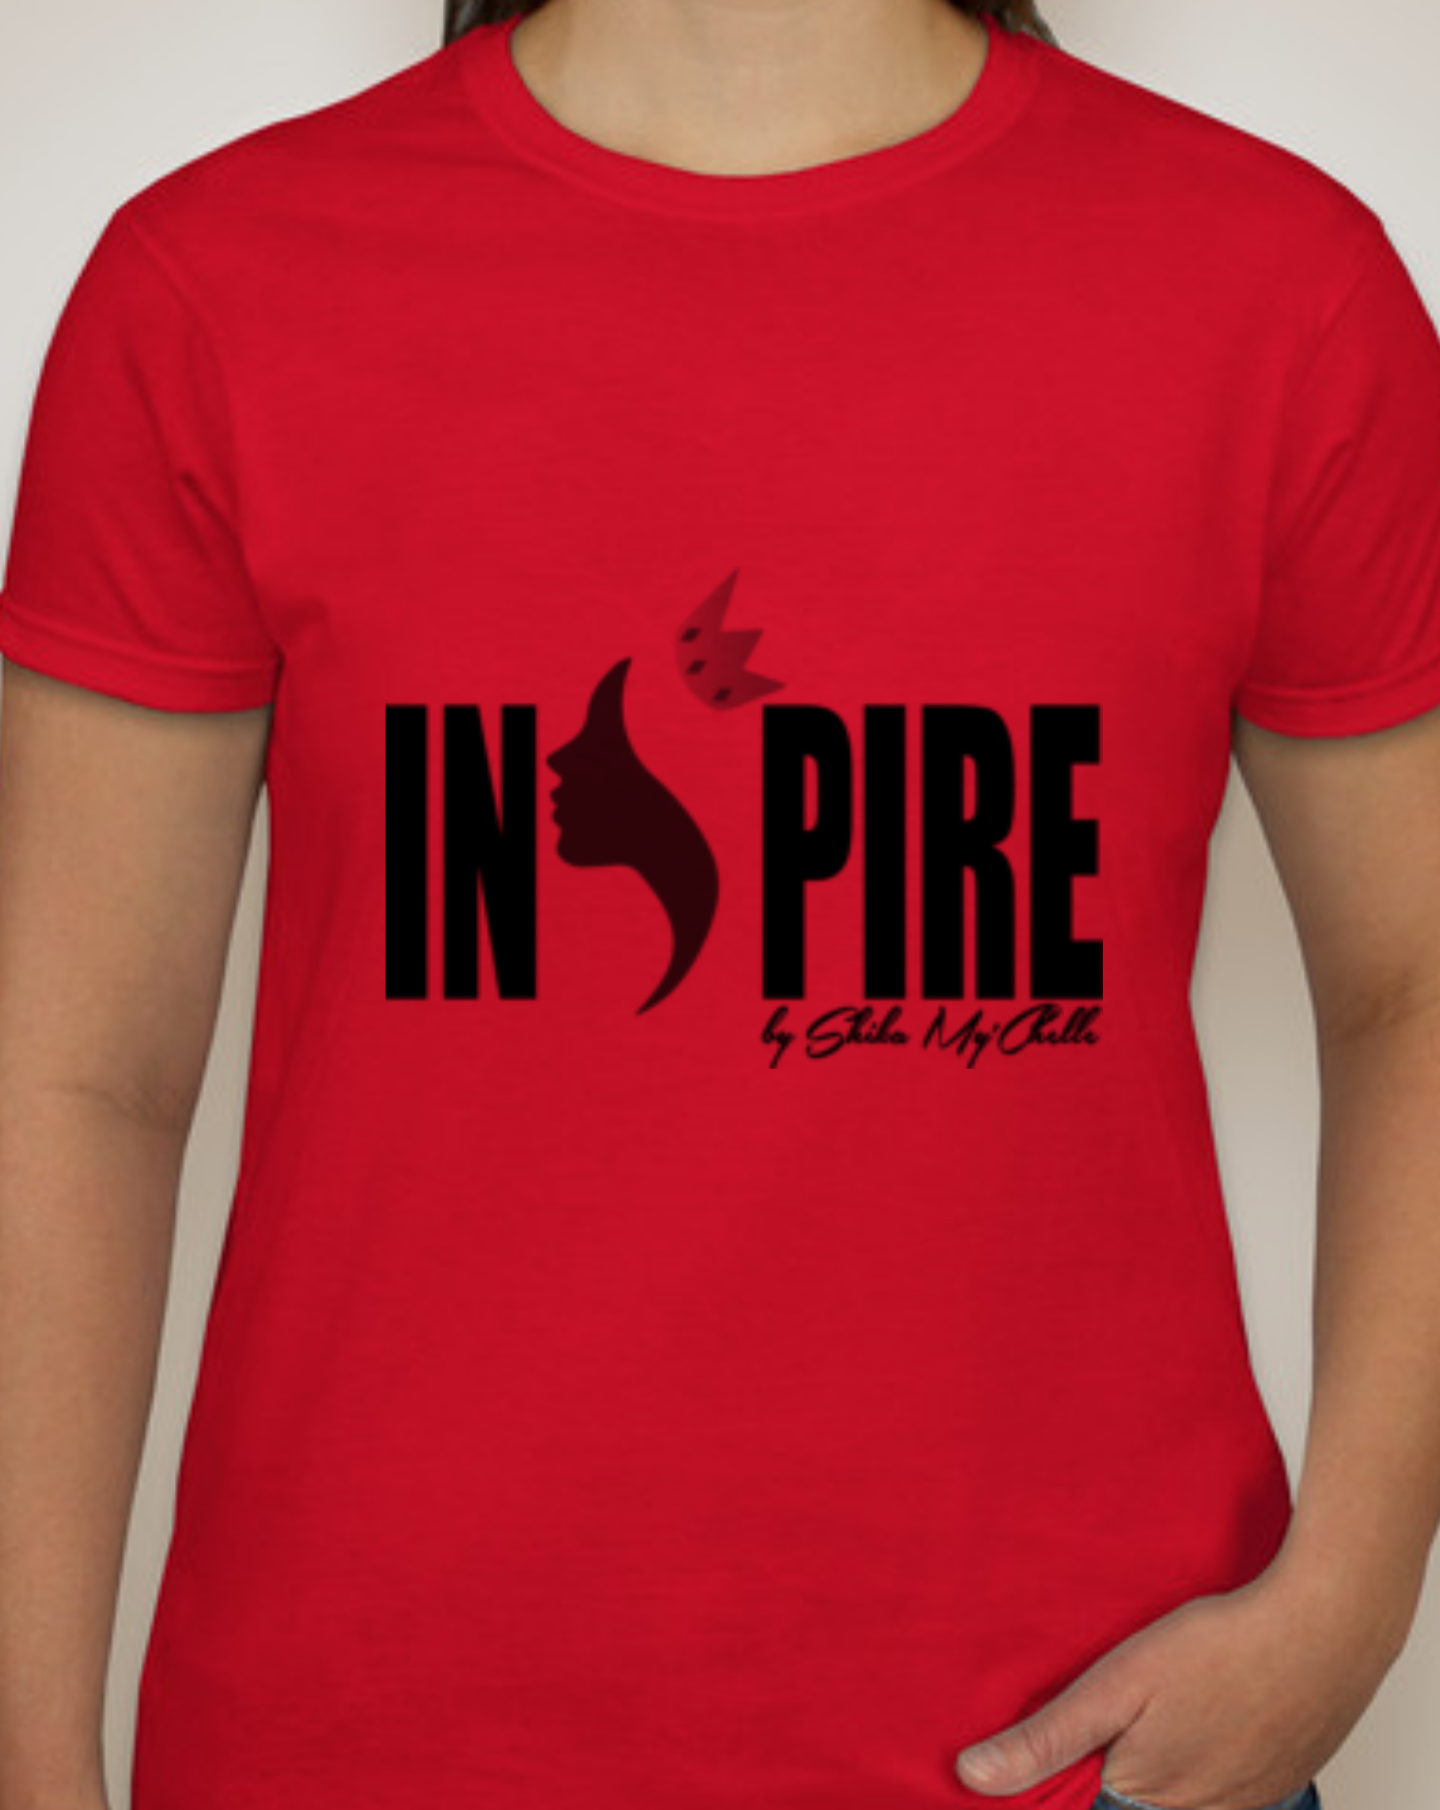 INSPIRE Logo Ladies Fitted Tees